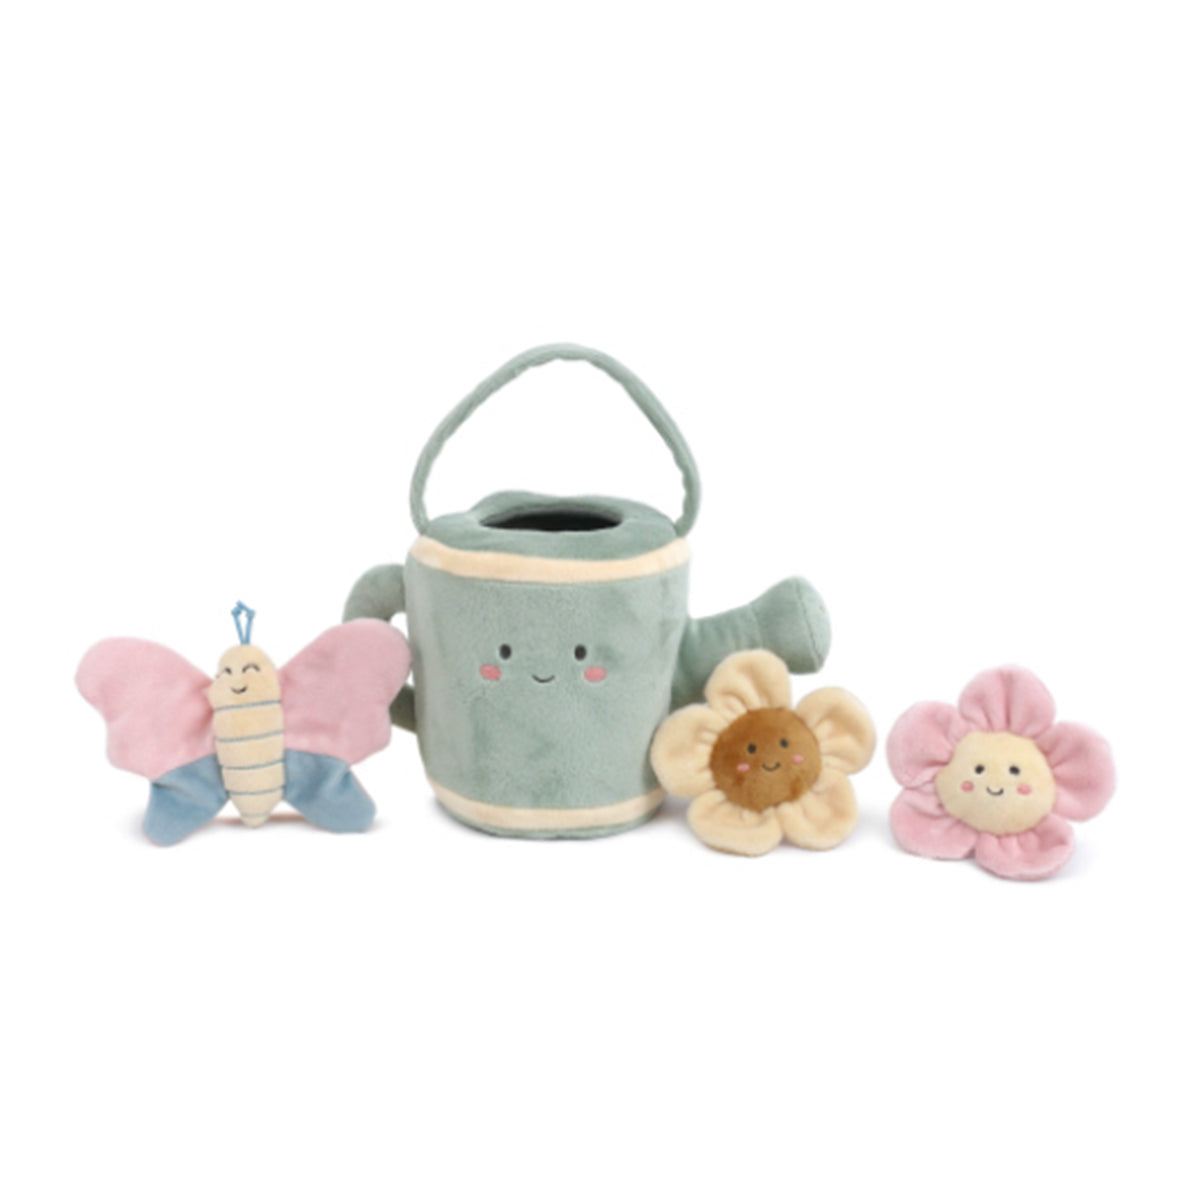 Mon Ami Spring Watering Can Activity Toy Set